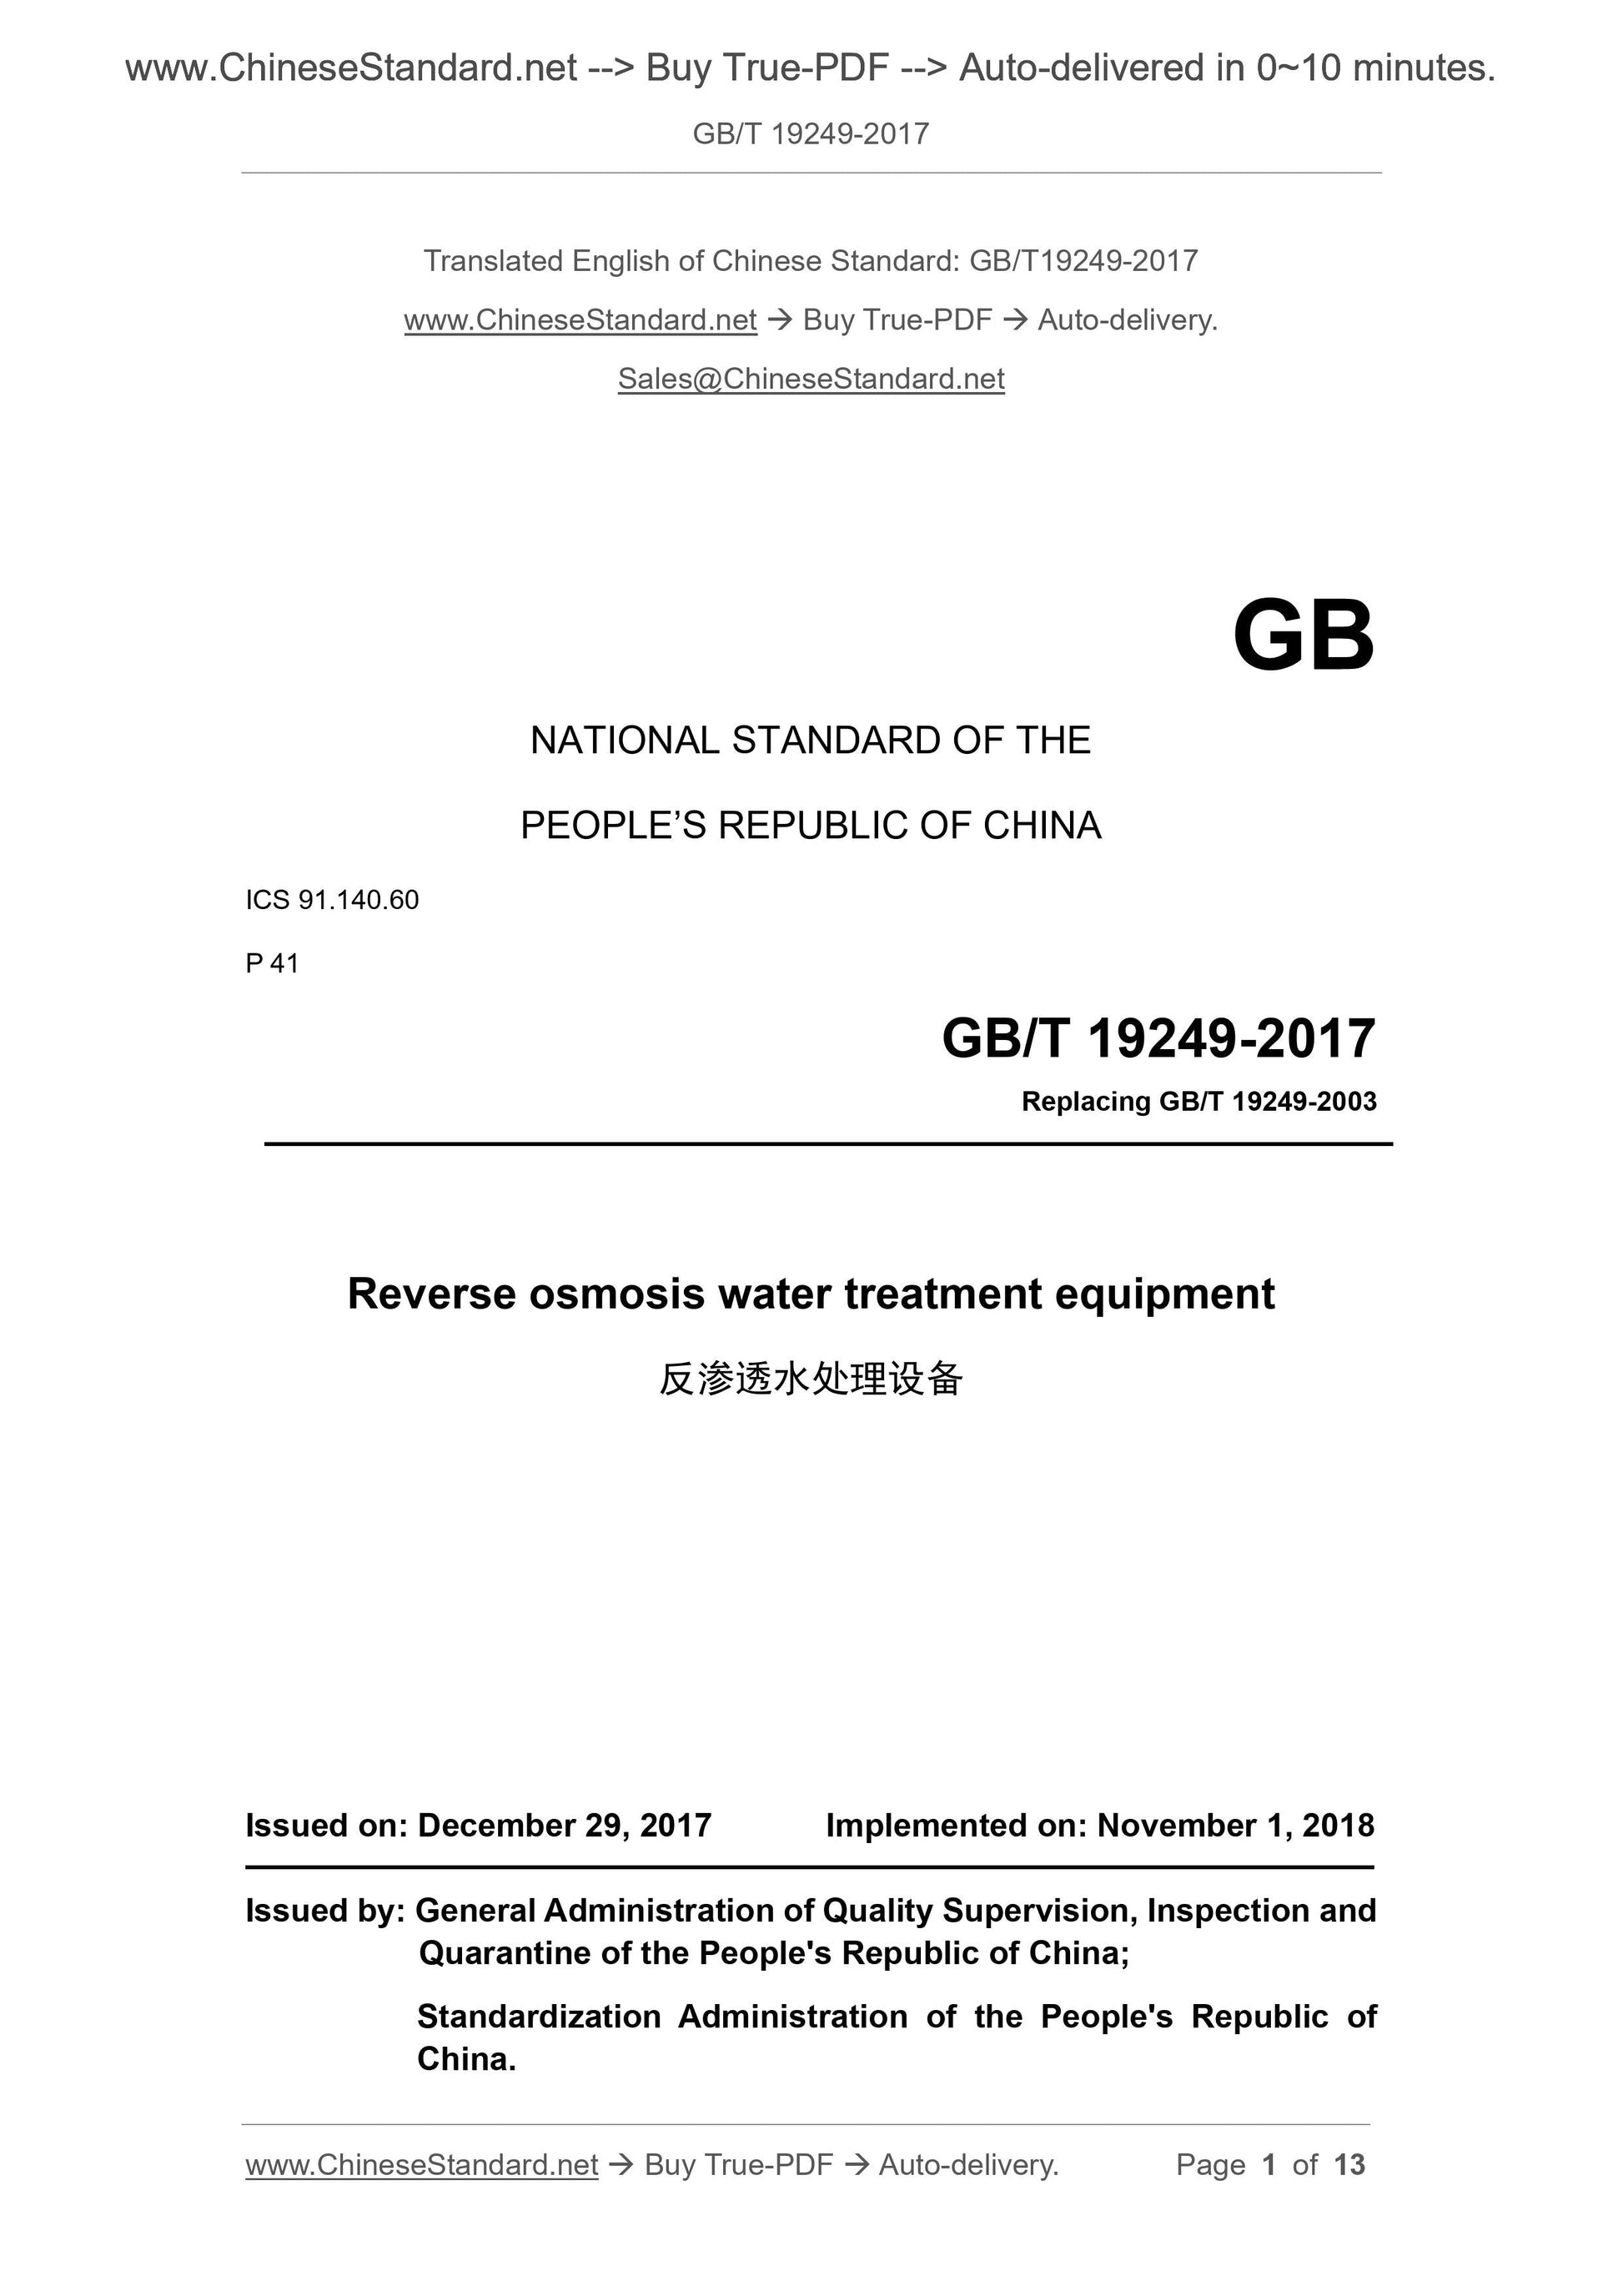 GB/T 19249-2017 Page 1